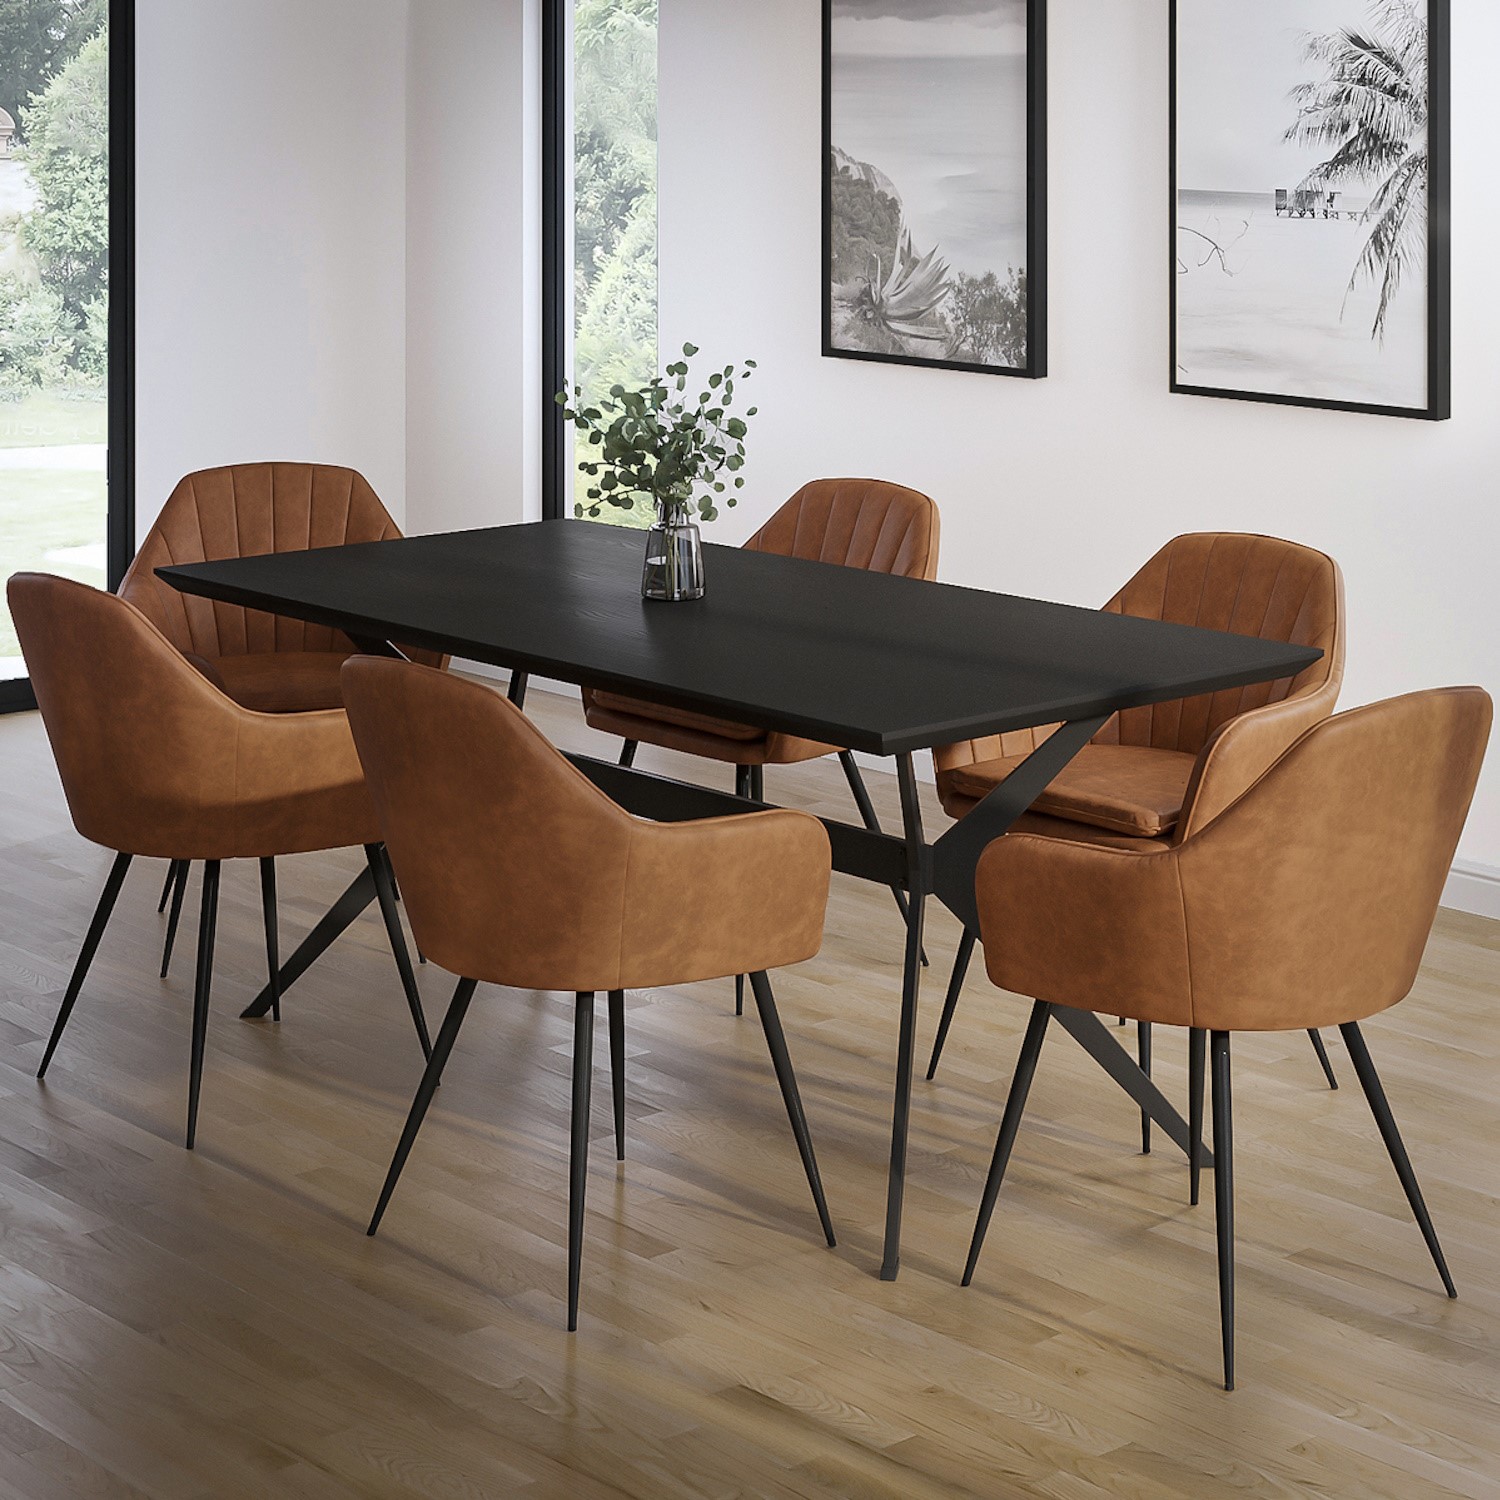 Photo of Black dining table with 6 tan faux leather dining chairs - rochelle